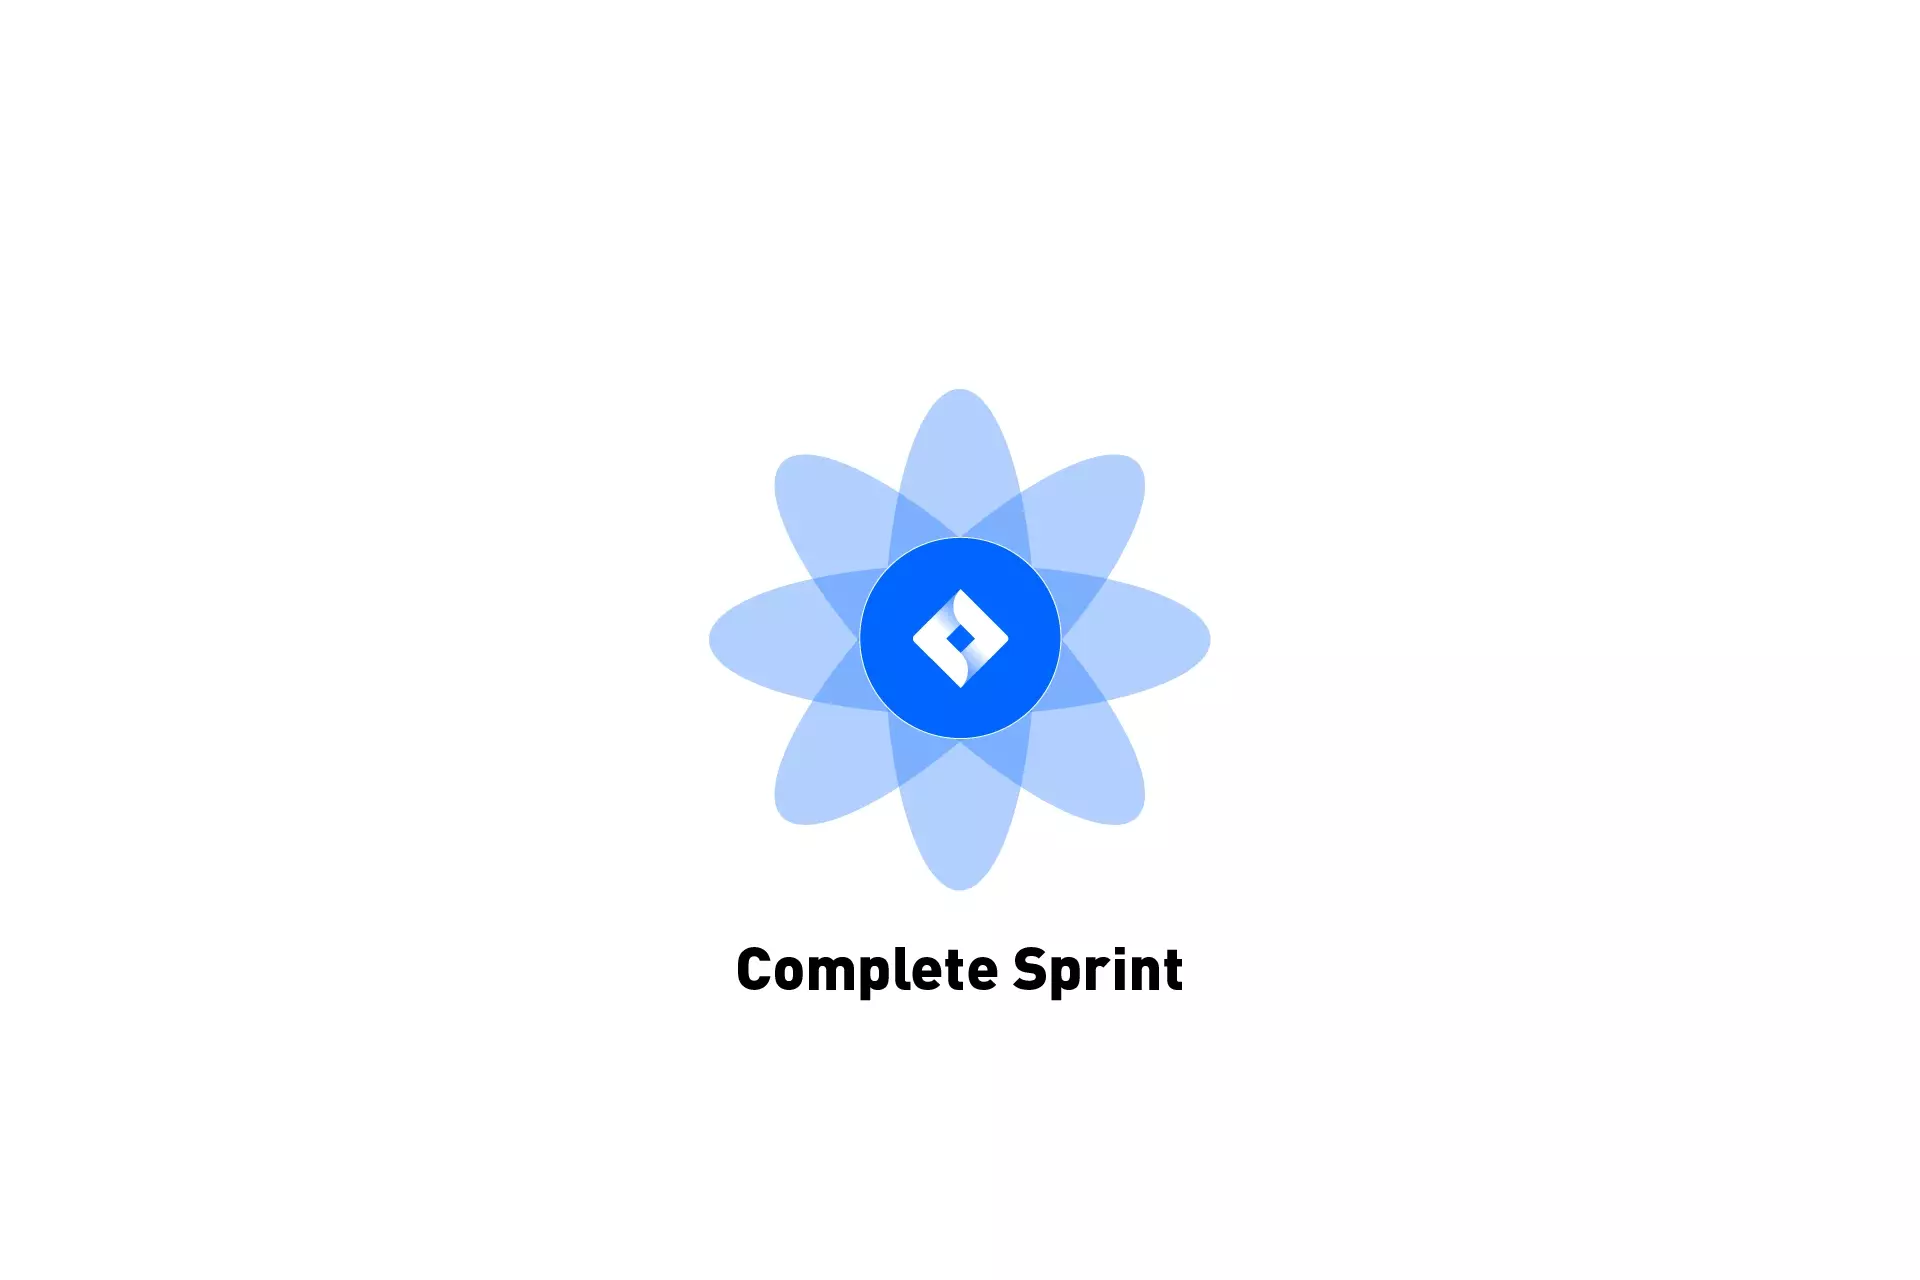 A flower that represents JIRA with the text "Complete Sprint" beneath it.